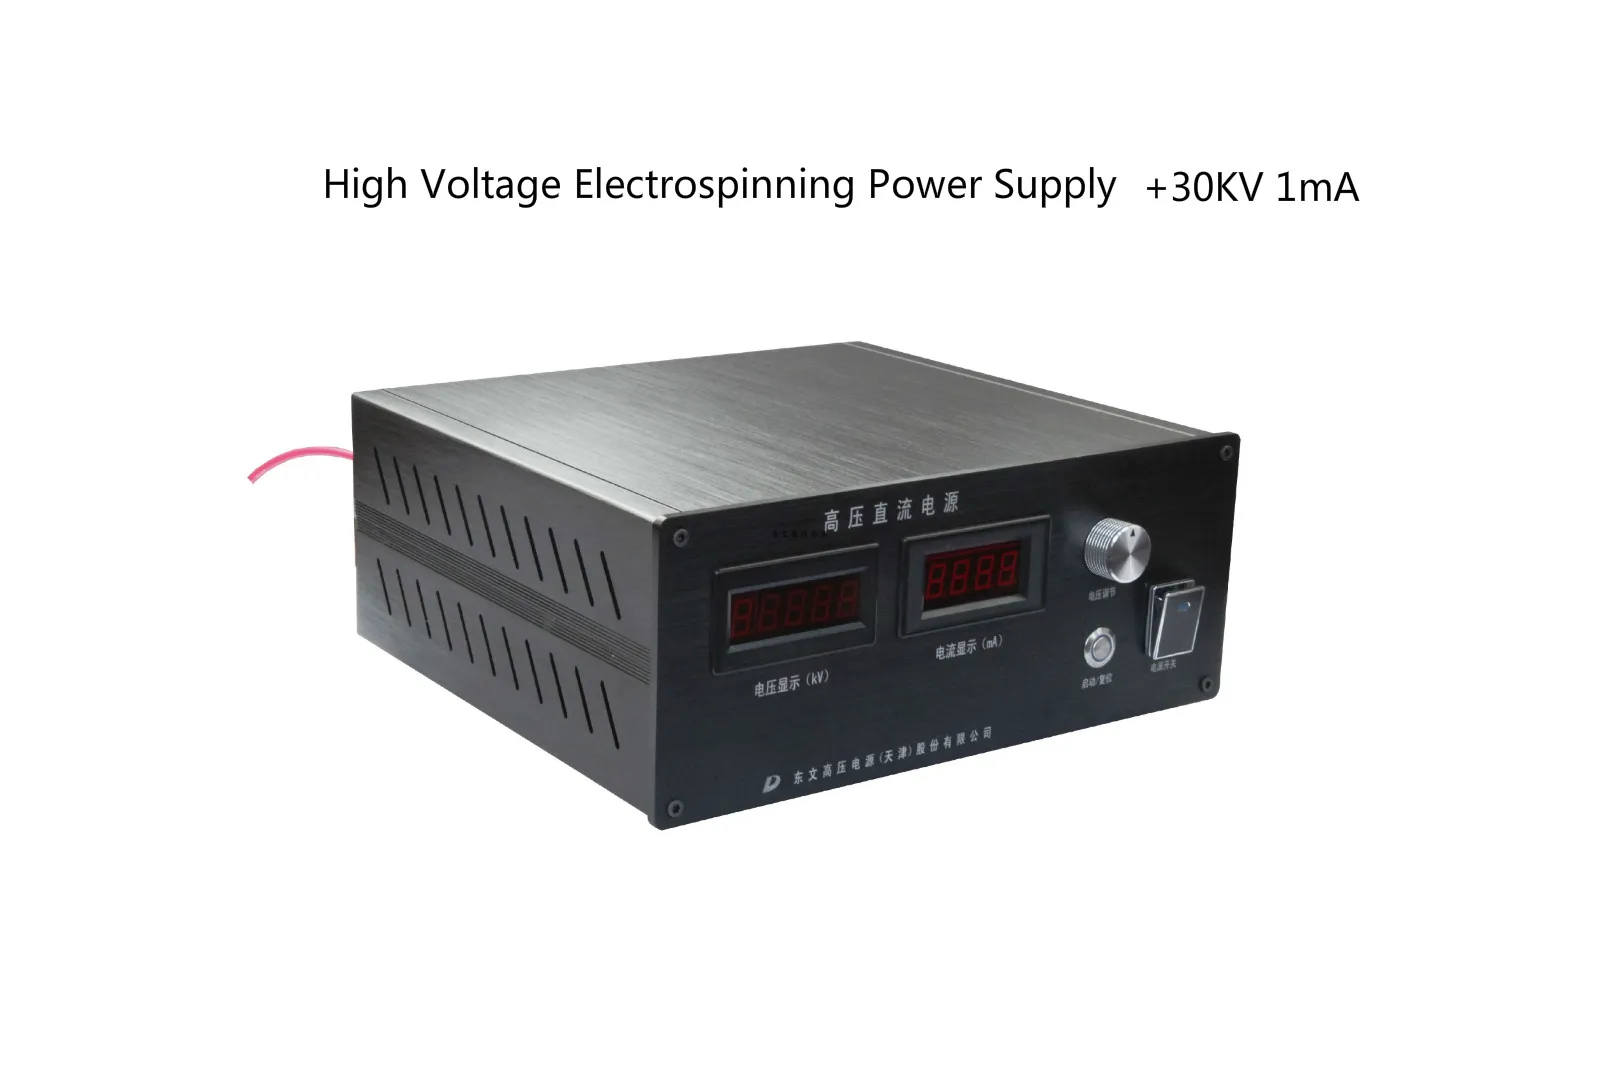 

New High Voltage Electrospinning Power Supply Electrostatic Spinning Power Supply +30KV 1mA